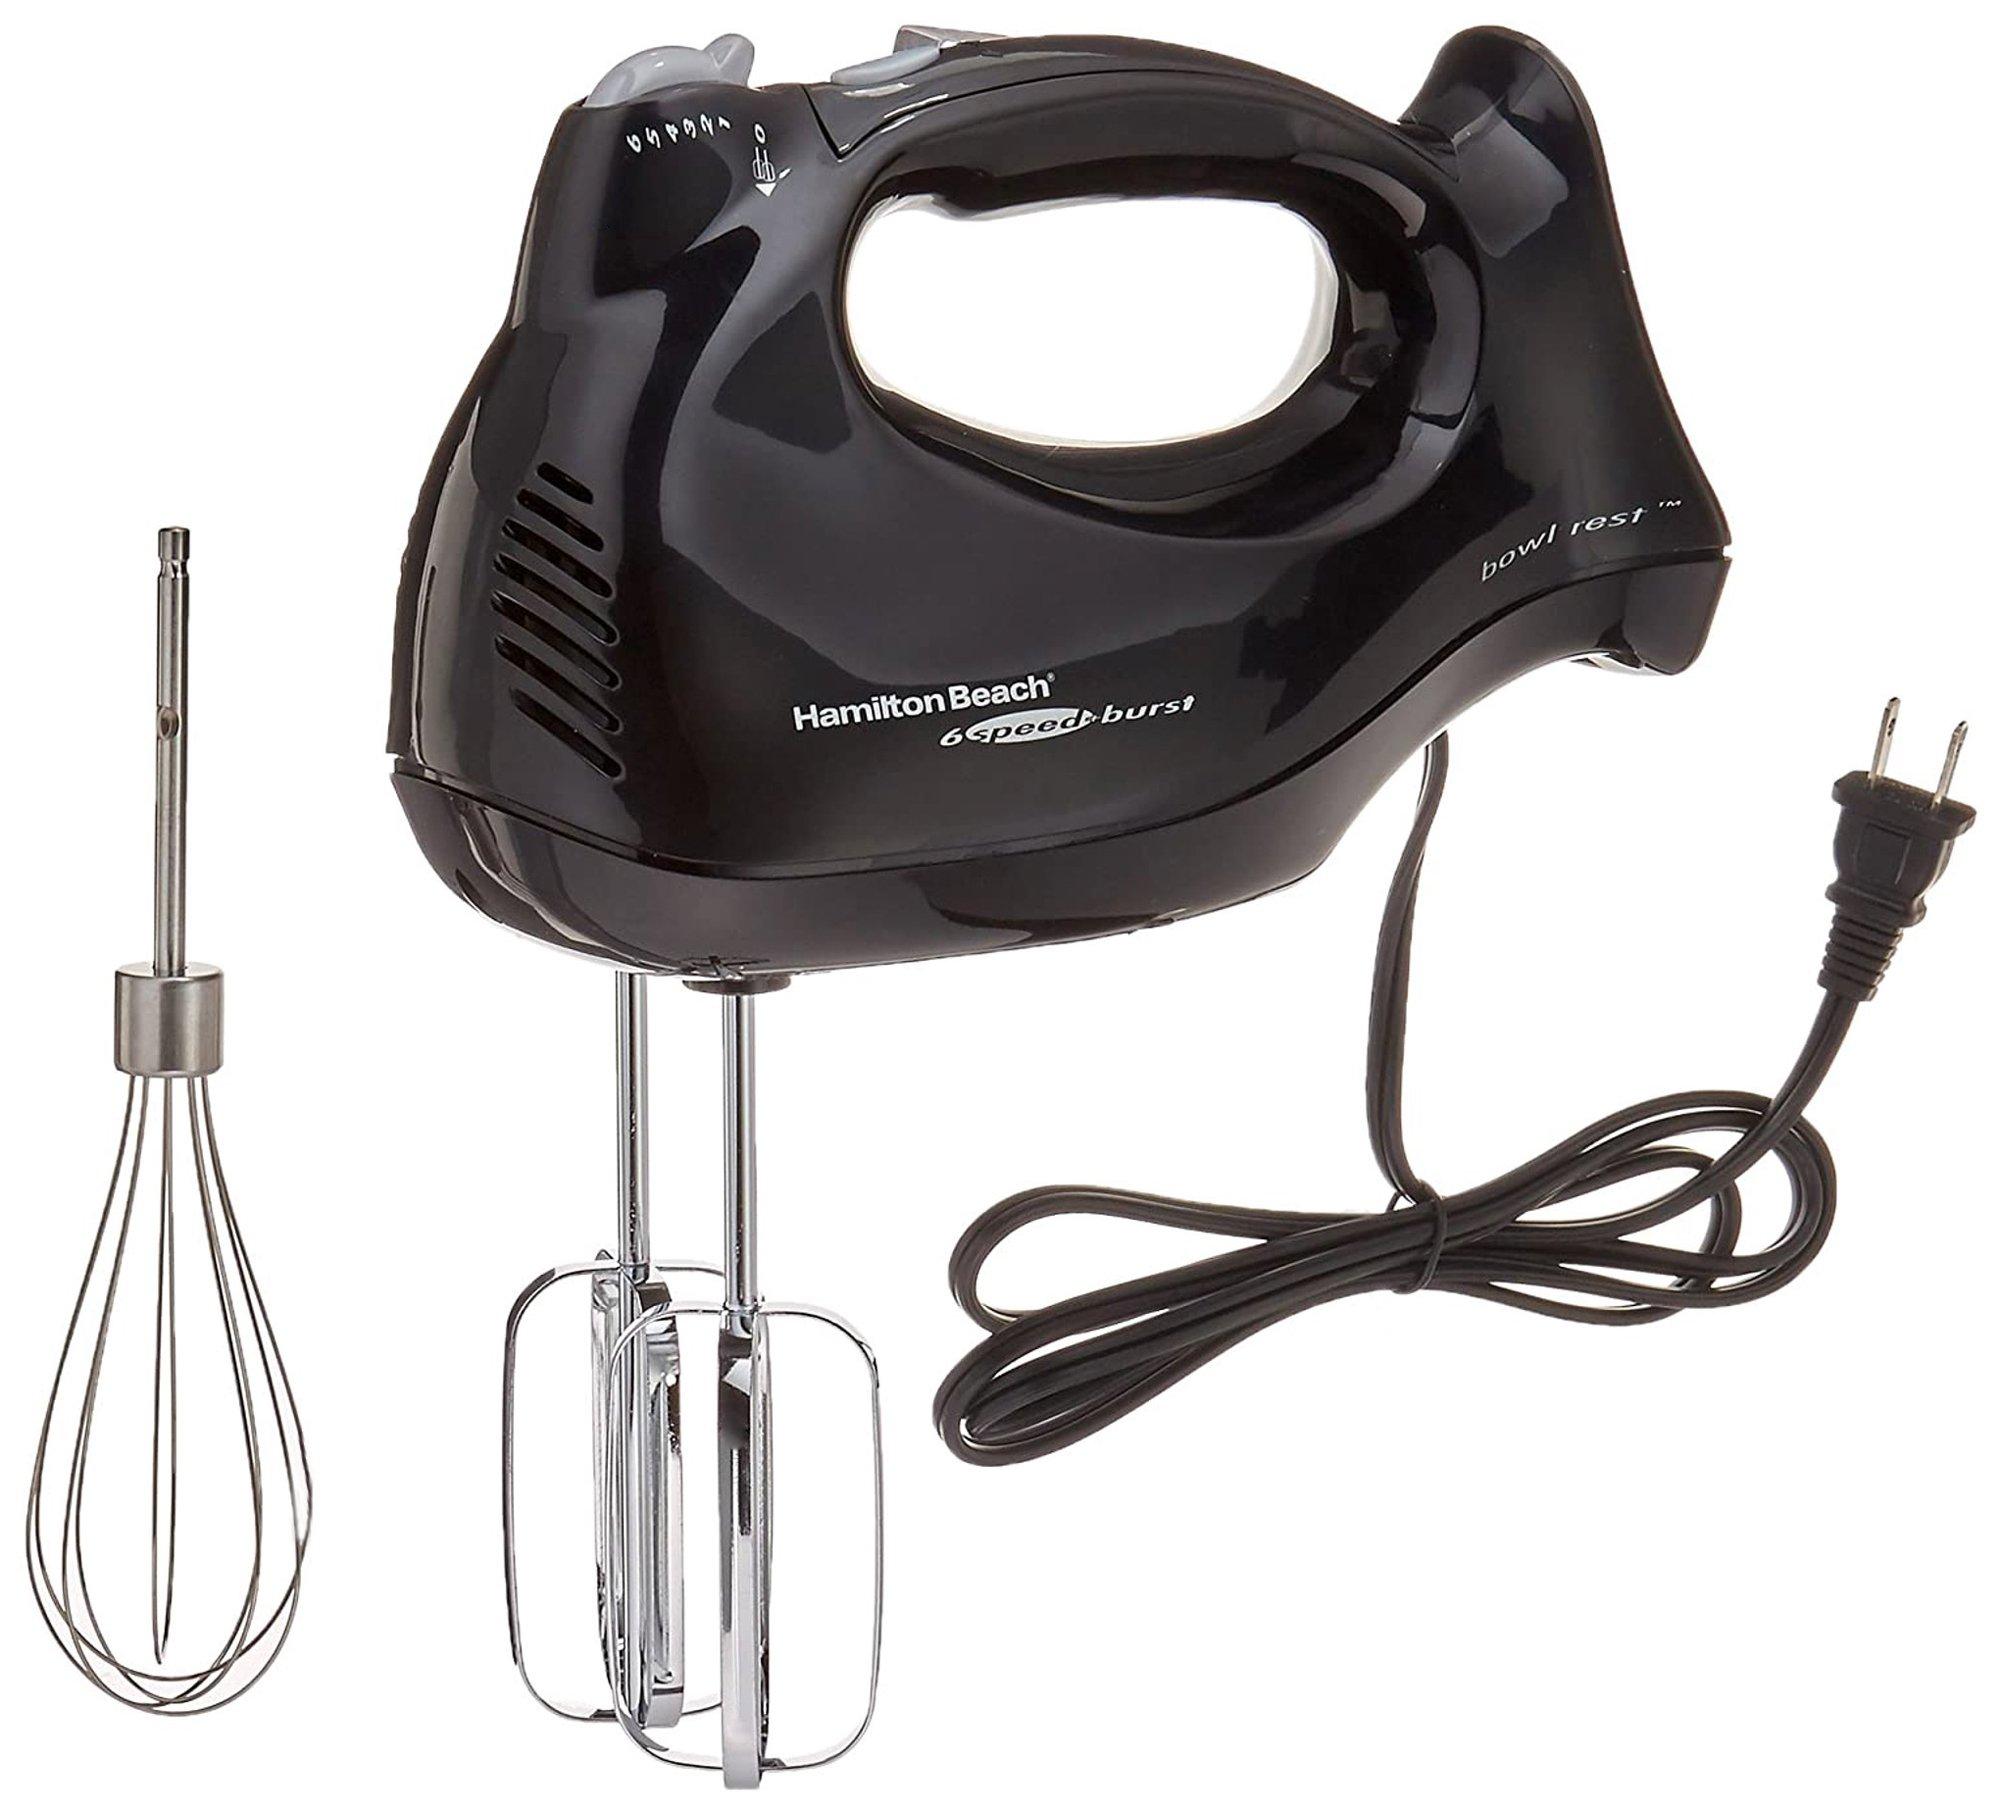 62692 Hand Mixer & Snap-On Case